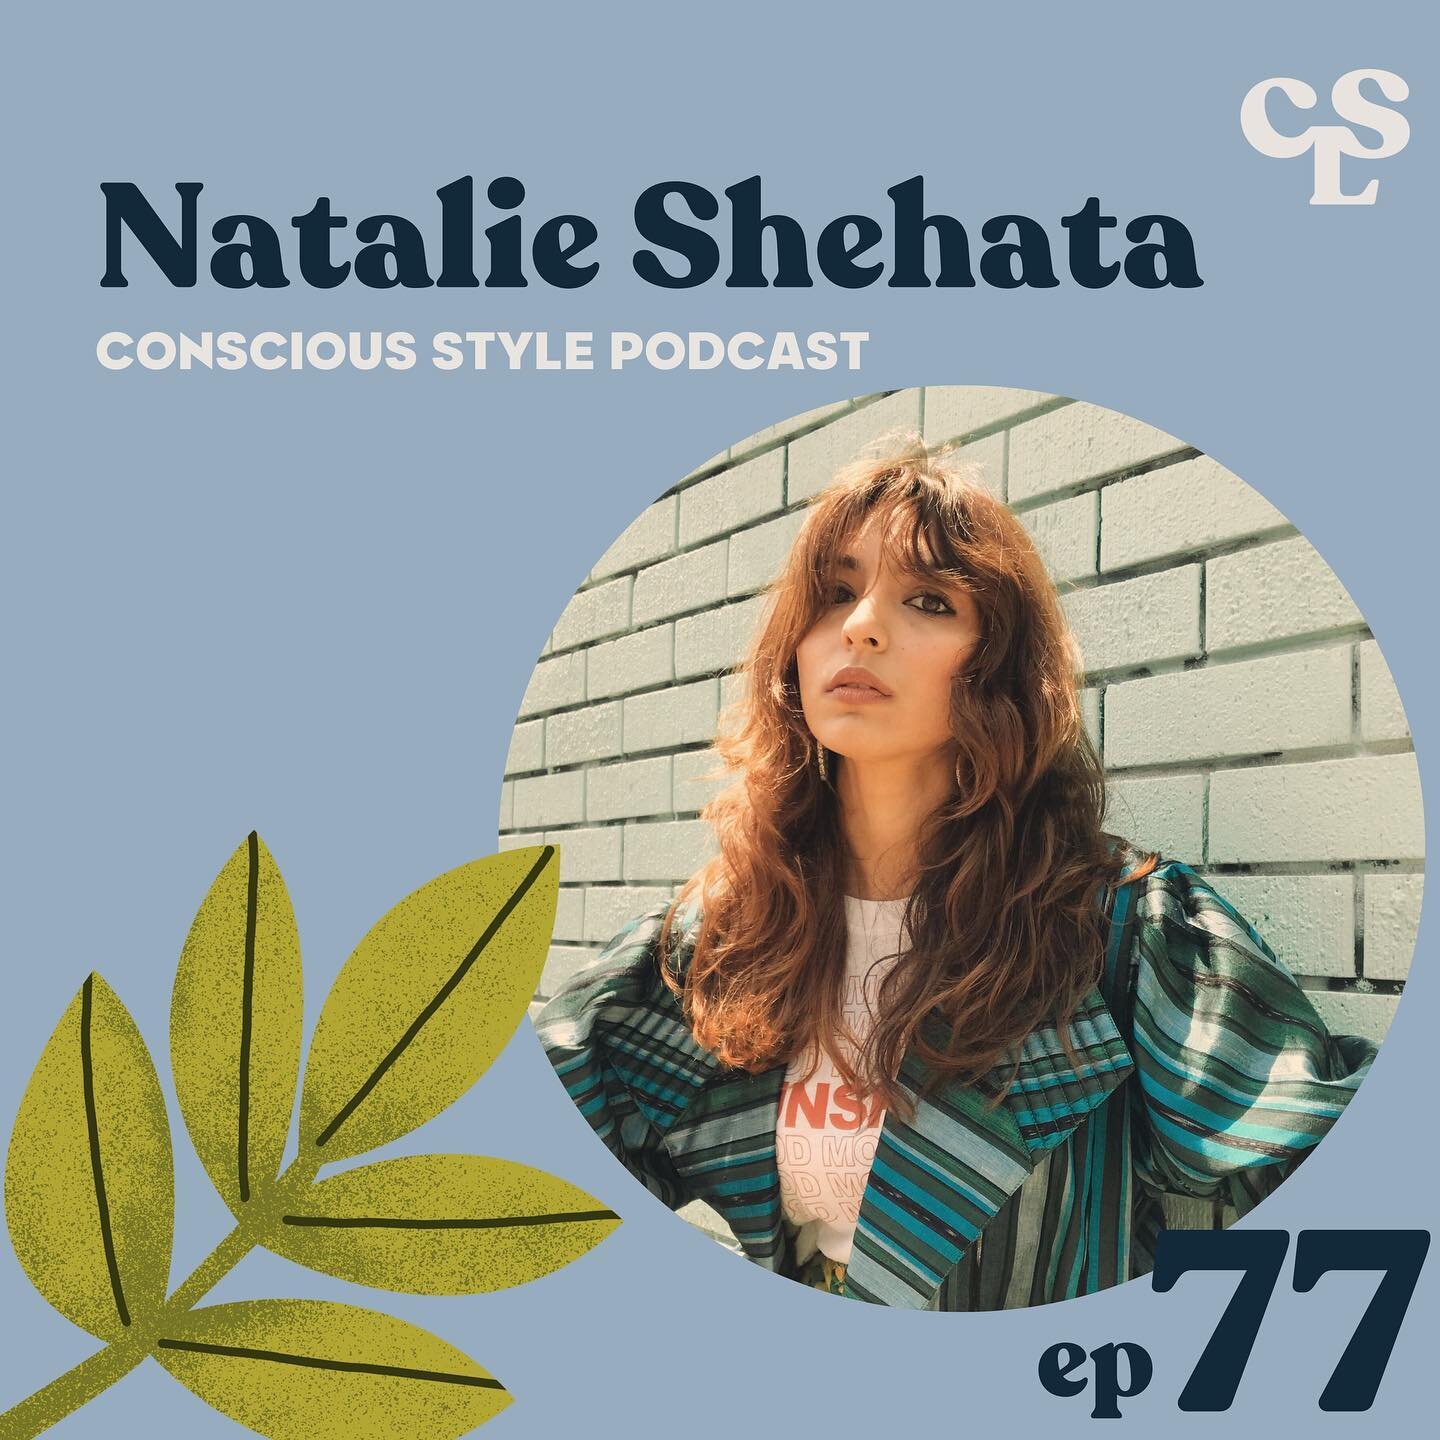 &lsquo;How can we truly democratise fashion? Building a Holistically Inclusive Fashion Industry&rsquo;. 🎤

I&rsquo;m super excited to share that a few weeks ago I had the opportunity to chat with @stella_hertantyo for the @consciousstyle podcast 🎙
